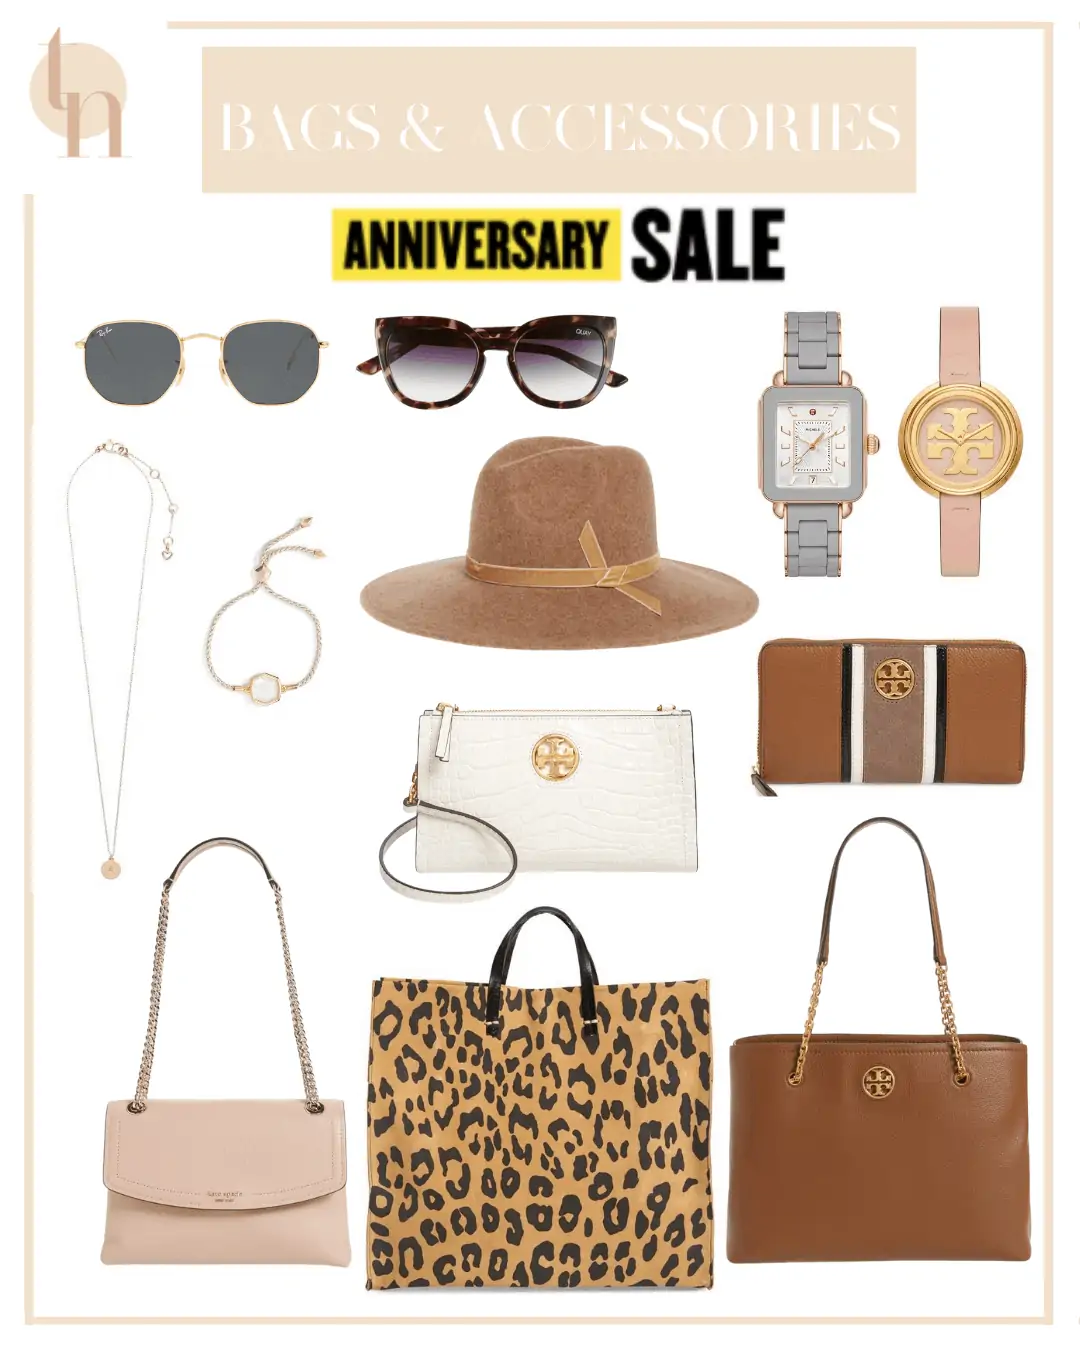 Nordstrom Anniversary Sale by popular Dallas life and style blog, Glamorous Versatility: collage image of Nordstrom Tory Burch Deco Wallet, Tory Burch Black Wallet, Tory Burch Tote, Kate Spade Initial Necklace, Kate Spade Handbag, Ray-Ban Sunglasses, Quay Sunglasses, Clare V. Leopard Print Tote, Leather Belt, Tory Burch Leather Wallet, Tory Burch Gold Watch, and Kendra Scott Bracelets.